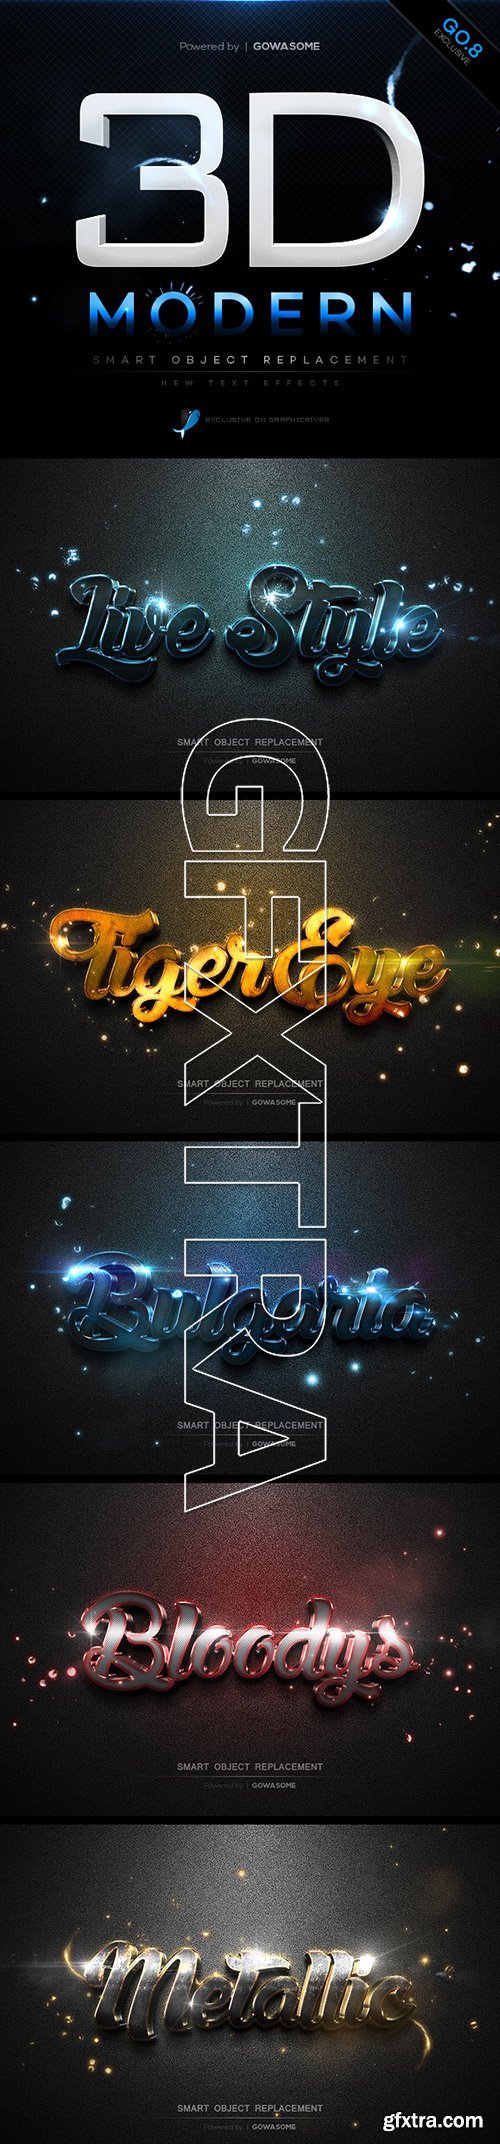 Graphicriver - Modern 3D Text Effects GO.8 11324830